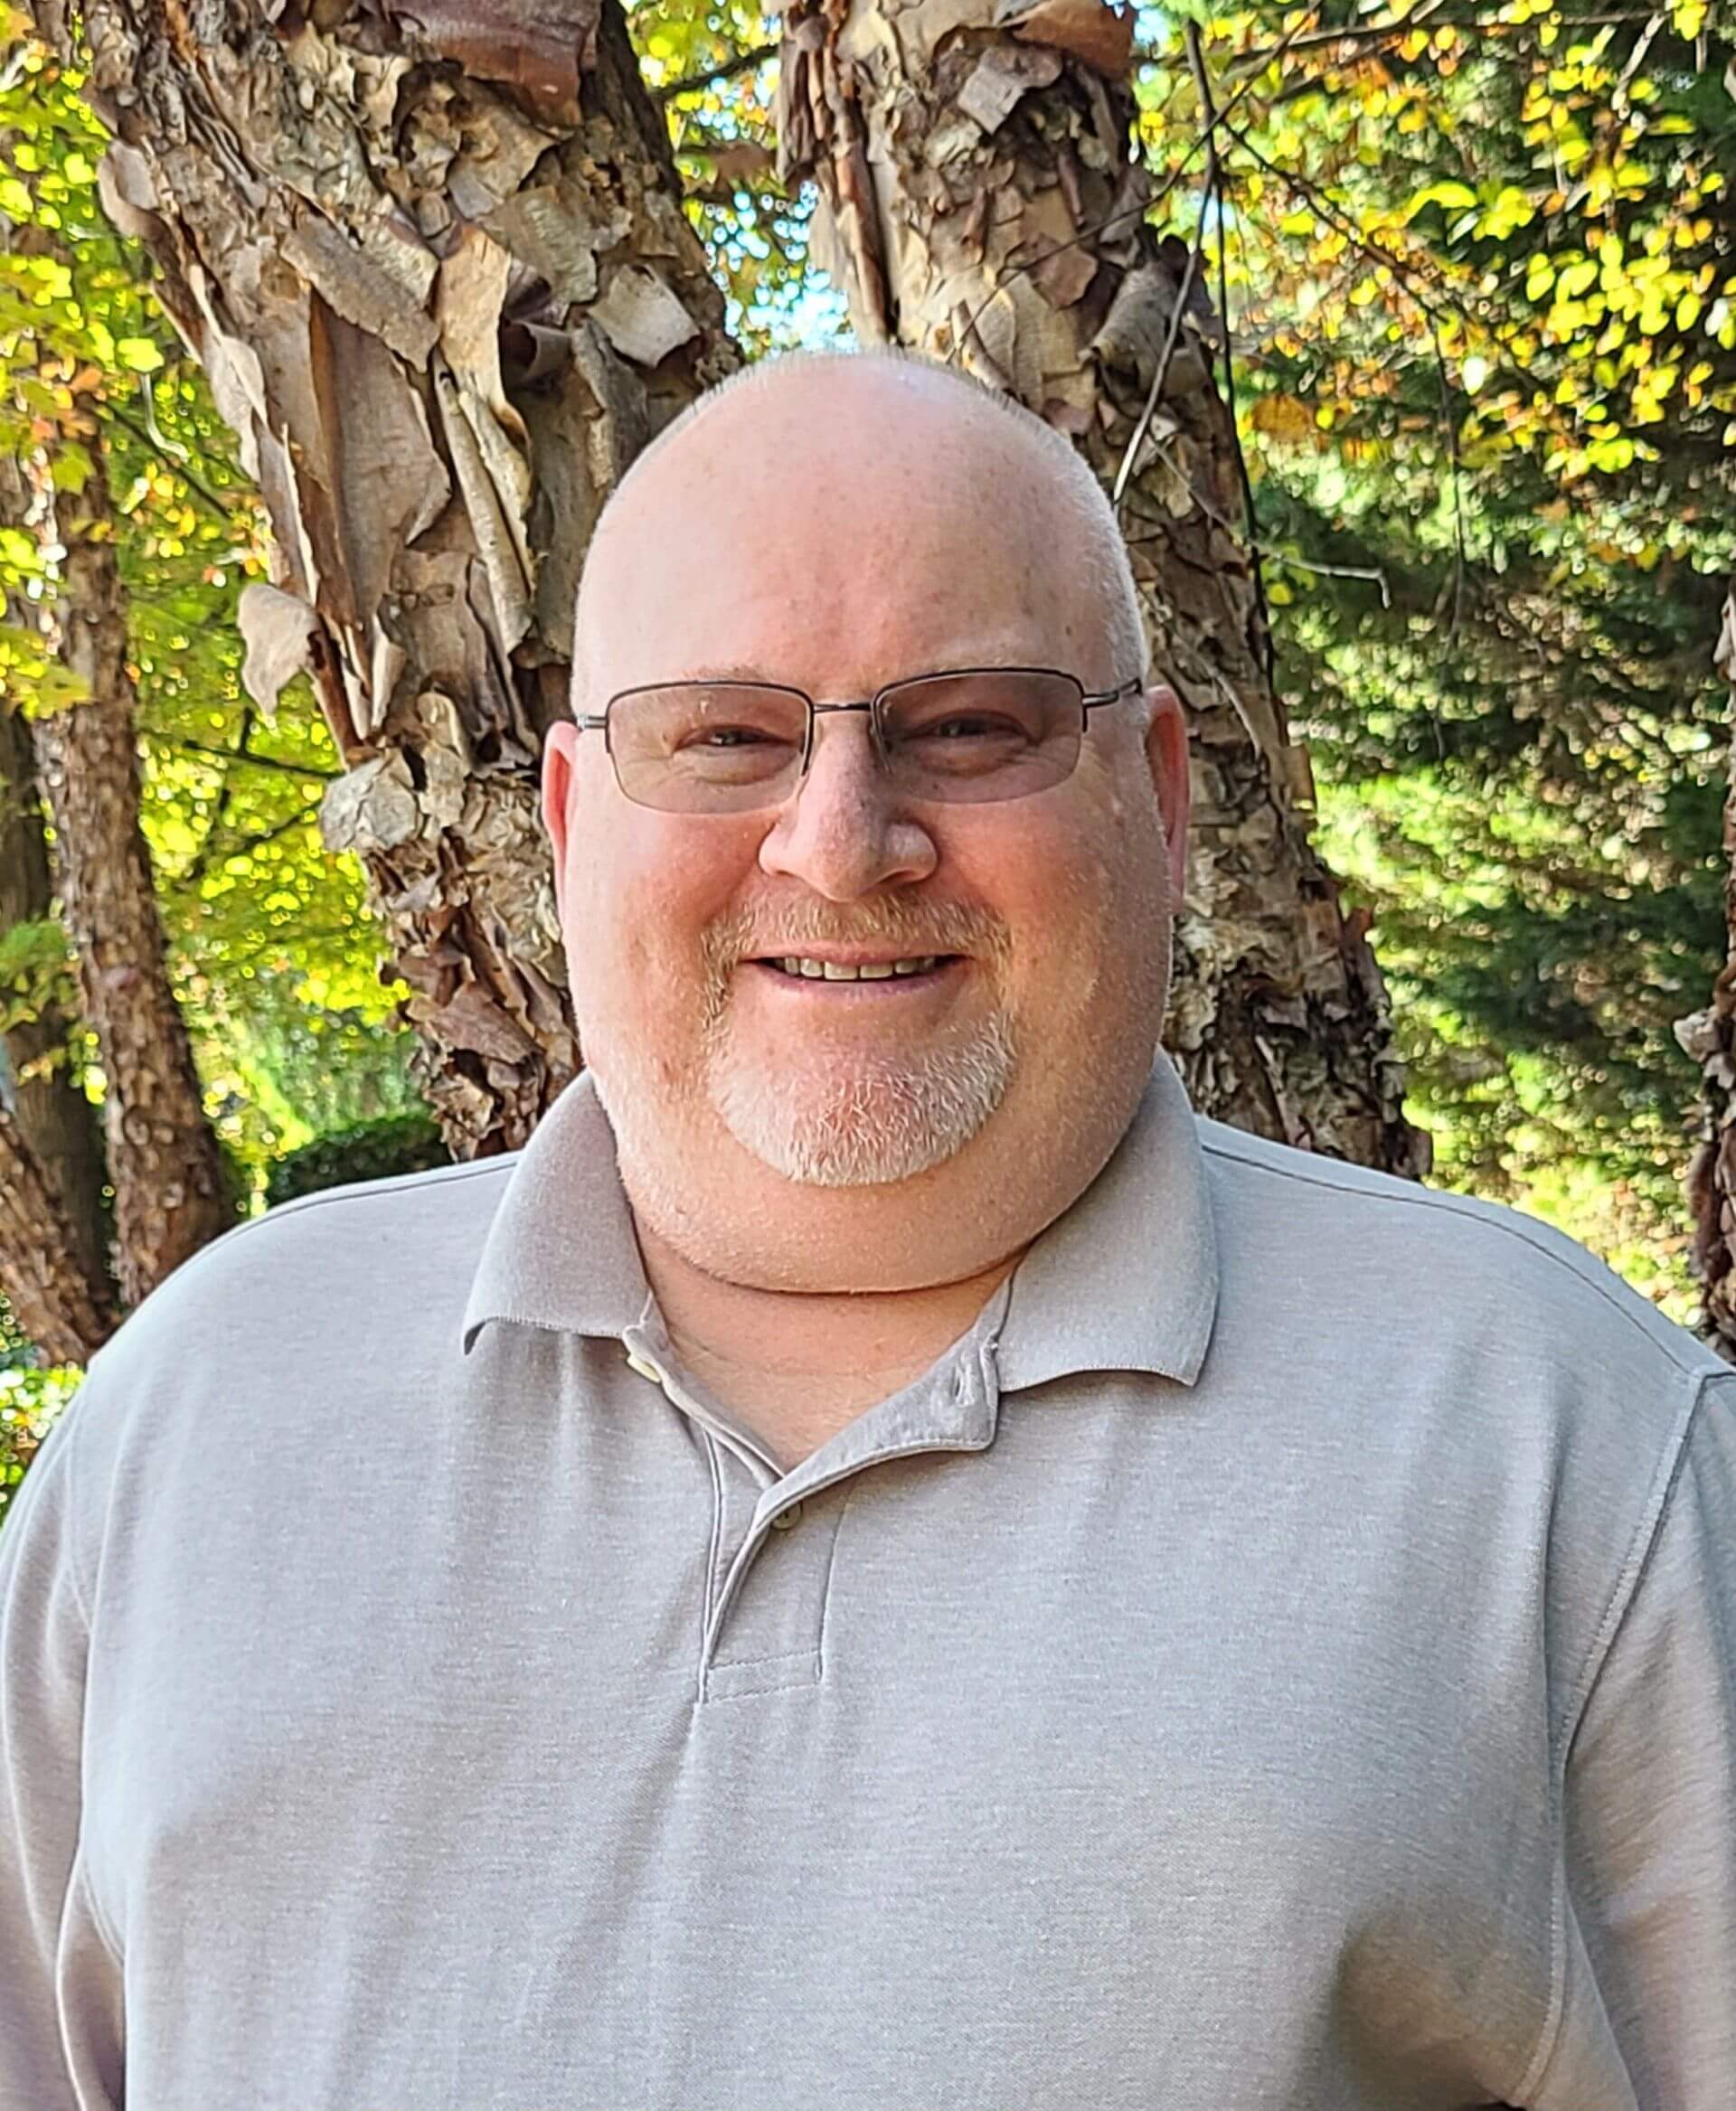 A bald man smiling in front of a tree.